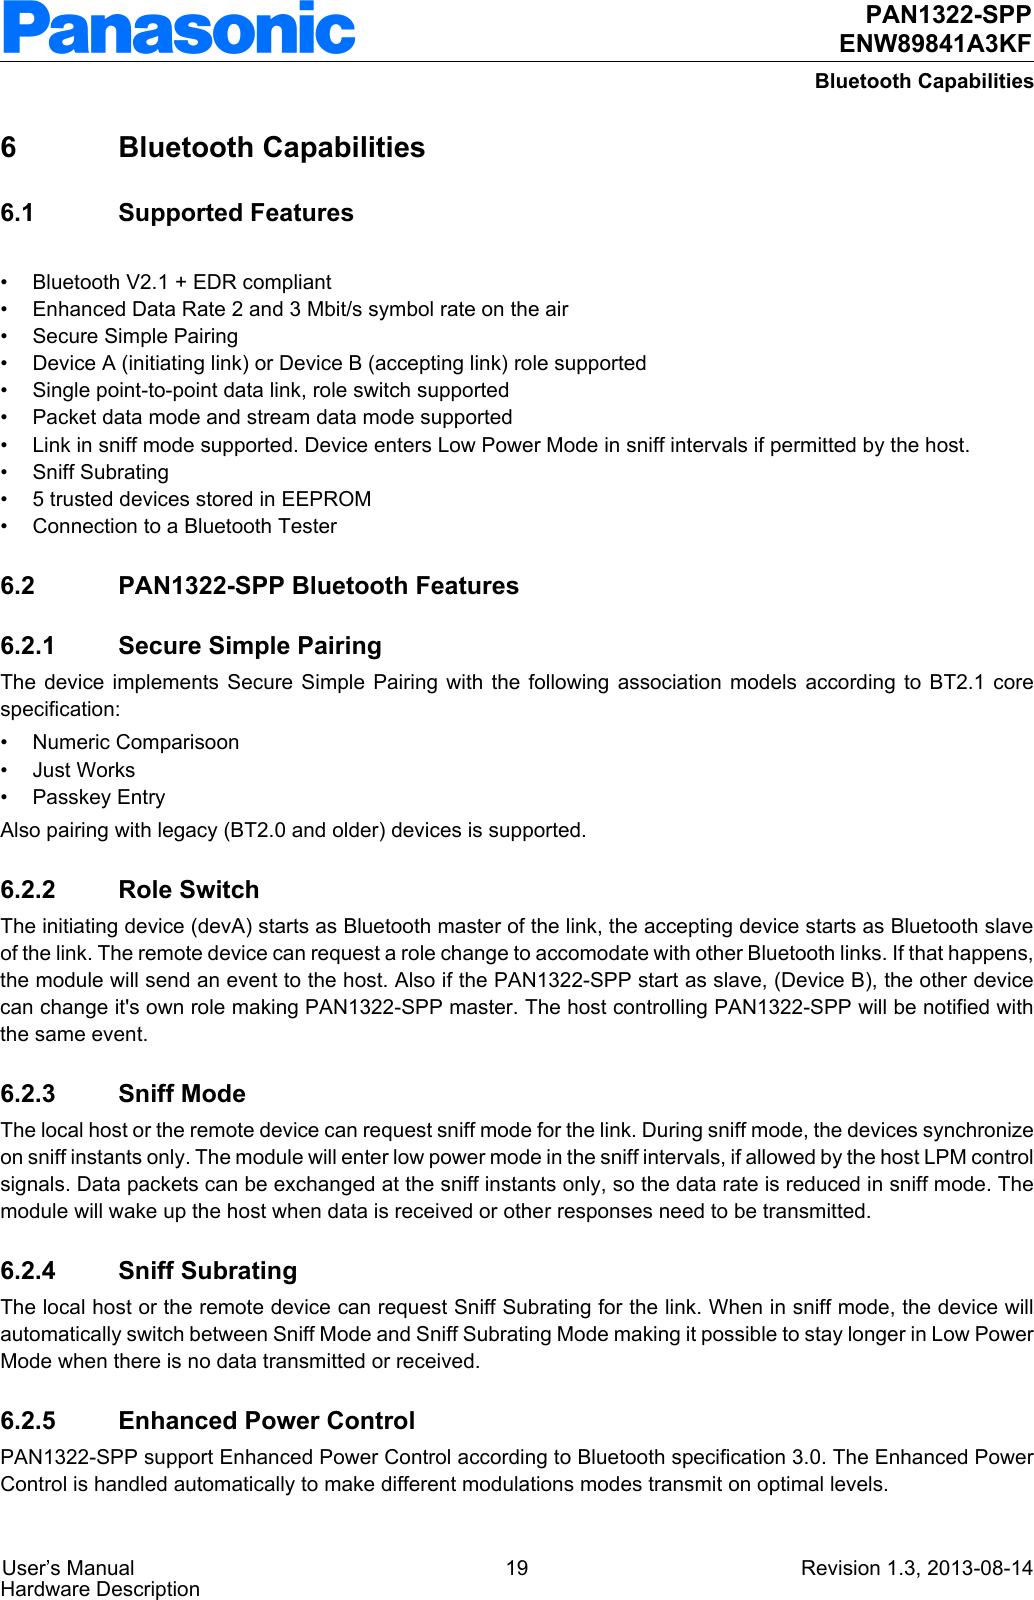  User’s Manual 19 Revision 1.3, 2013-08-14Hardware Description PAN1322-SPPENW89841A3KFBluetooth Capabilities6Bluetooth Capabilities6.1 Supported Features• Bluetooth V2.1 + EDR compliant• Enhanced Data Rate 2 and 3 Mbit/s symbol rate on the air• Secure Simple Pairing• Device A (initiating link) or Device B (accepting link) role supported• Single point-to-point data link, role switch supported• Packet data mode and stream data mode supported• Link in sniff mode supported. Device enters Low Power Mode in sniff intervals if permitted by the host.• Sniff Subrating• 5 trusted devices stored in EEPROM• Connection to a Bluetooth Tester6.2 PAN1322-SPP Bluetooth Features6.2.1 Secure Simple PairingThe device implements Secure Simple Pairing with the following association models according to BT2.1 core specification:• Numeric Comparisoon•Just Works• Passkey EntryAlso pairing with legacy (BT2.0 and older) devices is supported.6.2.2 Role SwitchThe initiating device (devA) starts as Bluetooth master of the link, the accepting device starts as Bluetooth slave of the link. The remote device can request a role change to accomodate with other Bluetooth links. If that happens, the module will send an event to the host. Also if the PAN1322-SPP start as slave, (Device B), the other device can change it&apos;s own role making PAN1322-SPP master. The host controlling PAN1322-SPP will be notified with the same event.6.2.3 Sniff ModeThe local host or the remote device can request sniff mode for the link. During sniff mode, the devices synchronize on sniff instants only. The module will enter low power mode in the sniff intervals, if allowed by the host LPM control signals. Data packets can be exchanged at the sniff instants only, so the data rate is reduced in sniff mode. The module will wake up the host when data is received or other responses need to be transmitted.6.2.4 Sniff SubratingThe local host or the remote device can request Sniff Subrating for the link. When in sniff mode, the device will automatically switch between Sniff Mode and Sniff Subrating Mode making it possible to stay longer in Low Power Mode when there is no data transmitted or received.6.2.5 Enhanced Power ControlPAN1322-SPP support Enhanced Power Control according to Bluetooth specification 3.0. The Enhanced Power Control is handled automatically to make different modulations modes transmit on optimal levels.